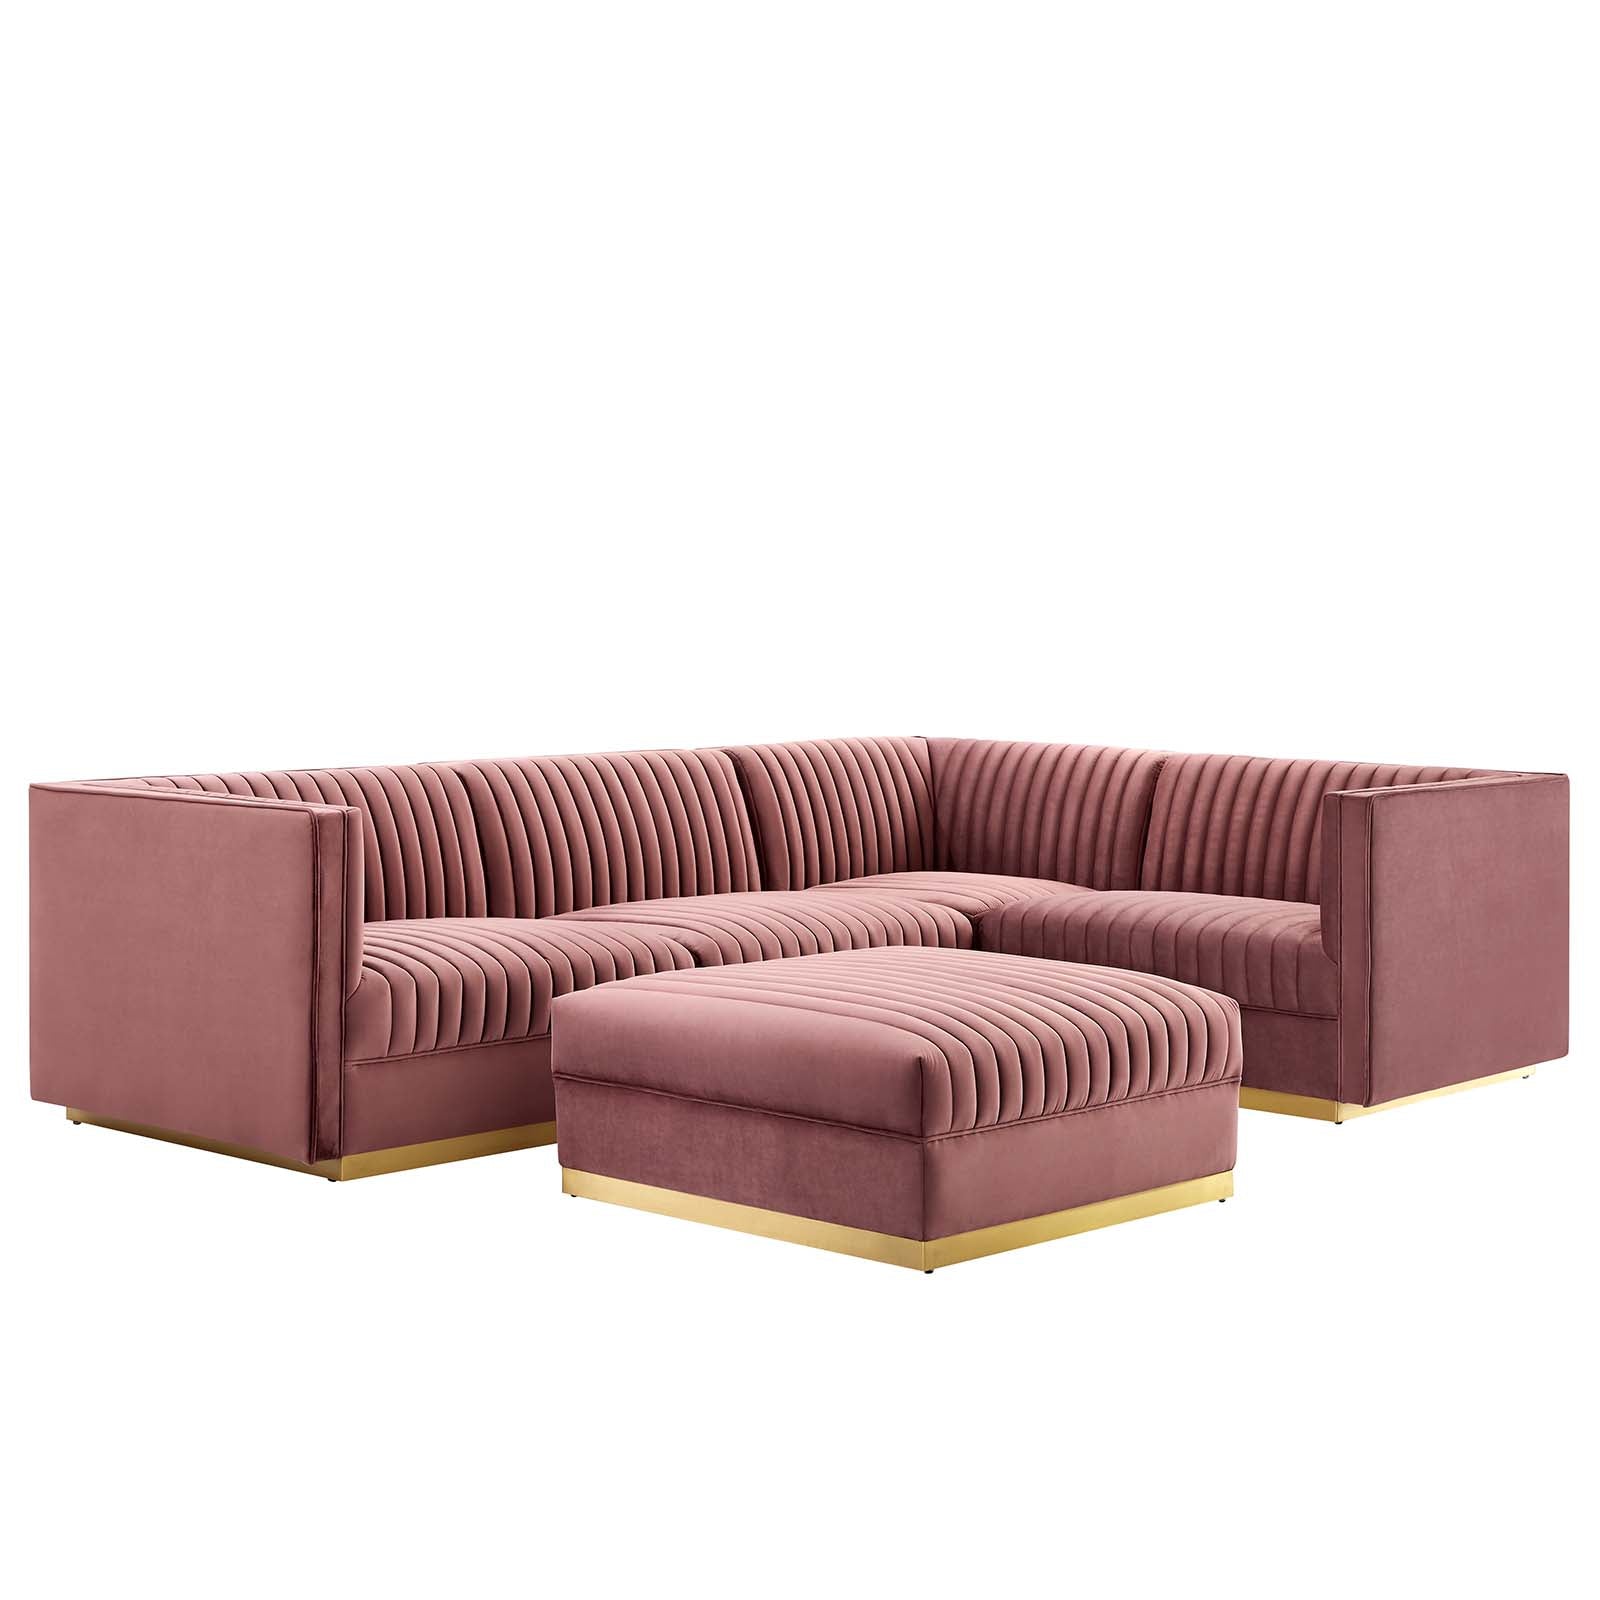 Modway Sectional Sofas - Sanguine Channel Tufted Performance Velvet 5 Piece Right-Facing Modular Sectional Sofa Dusty Rose